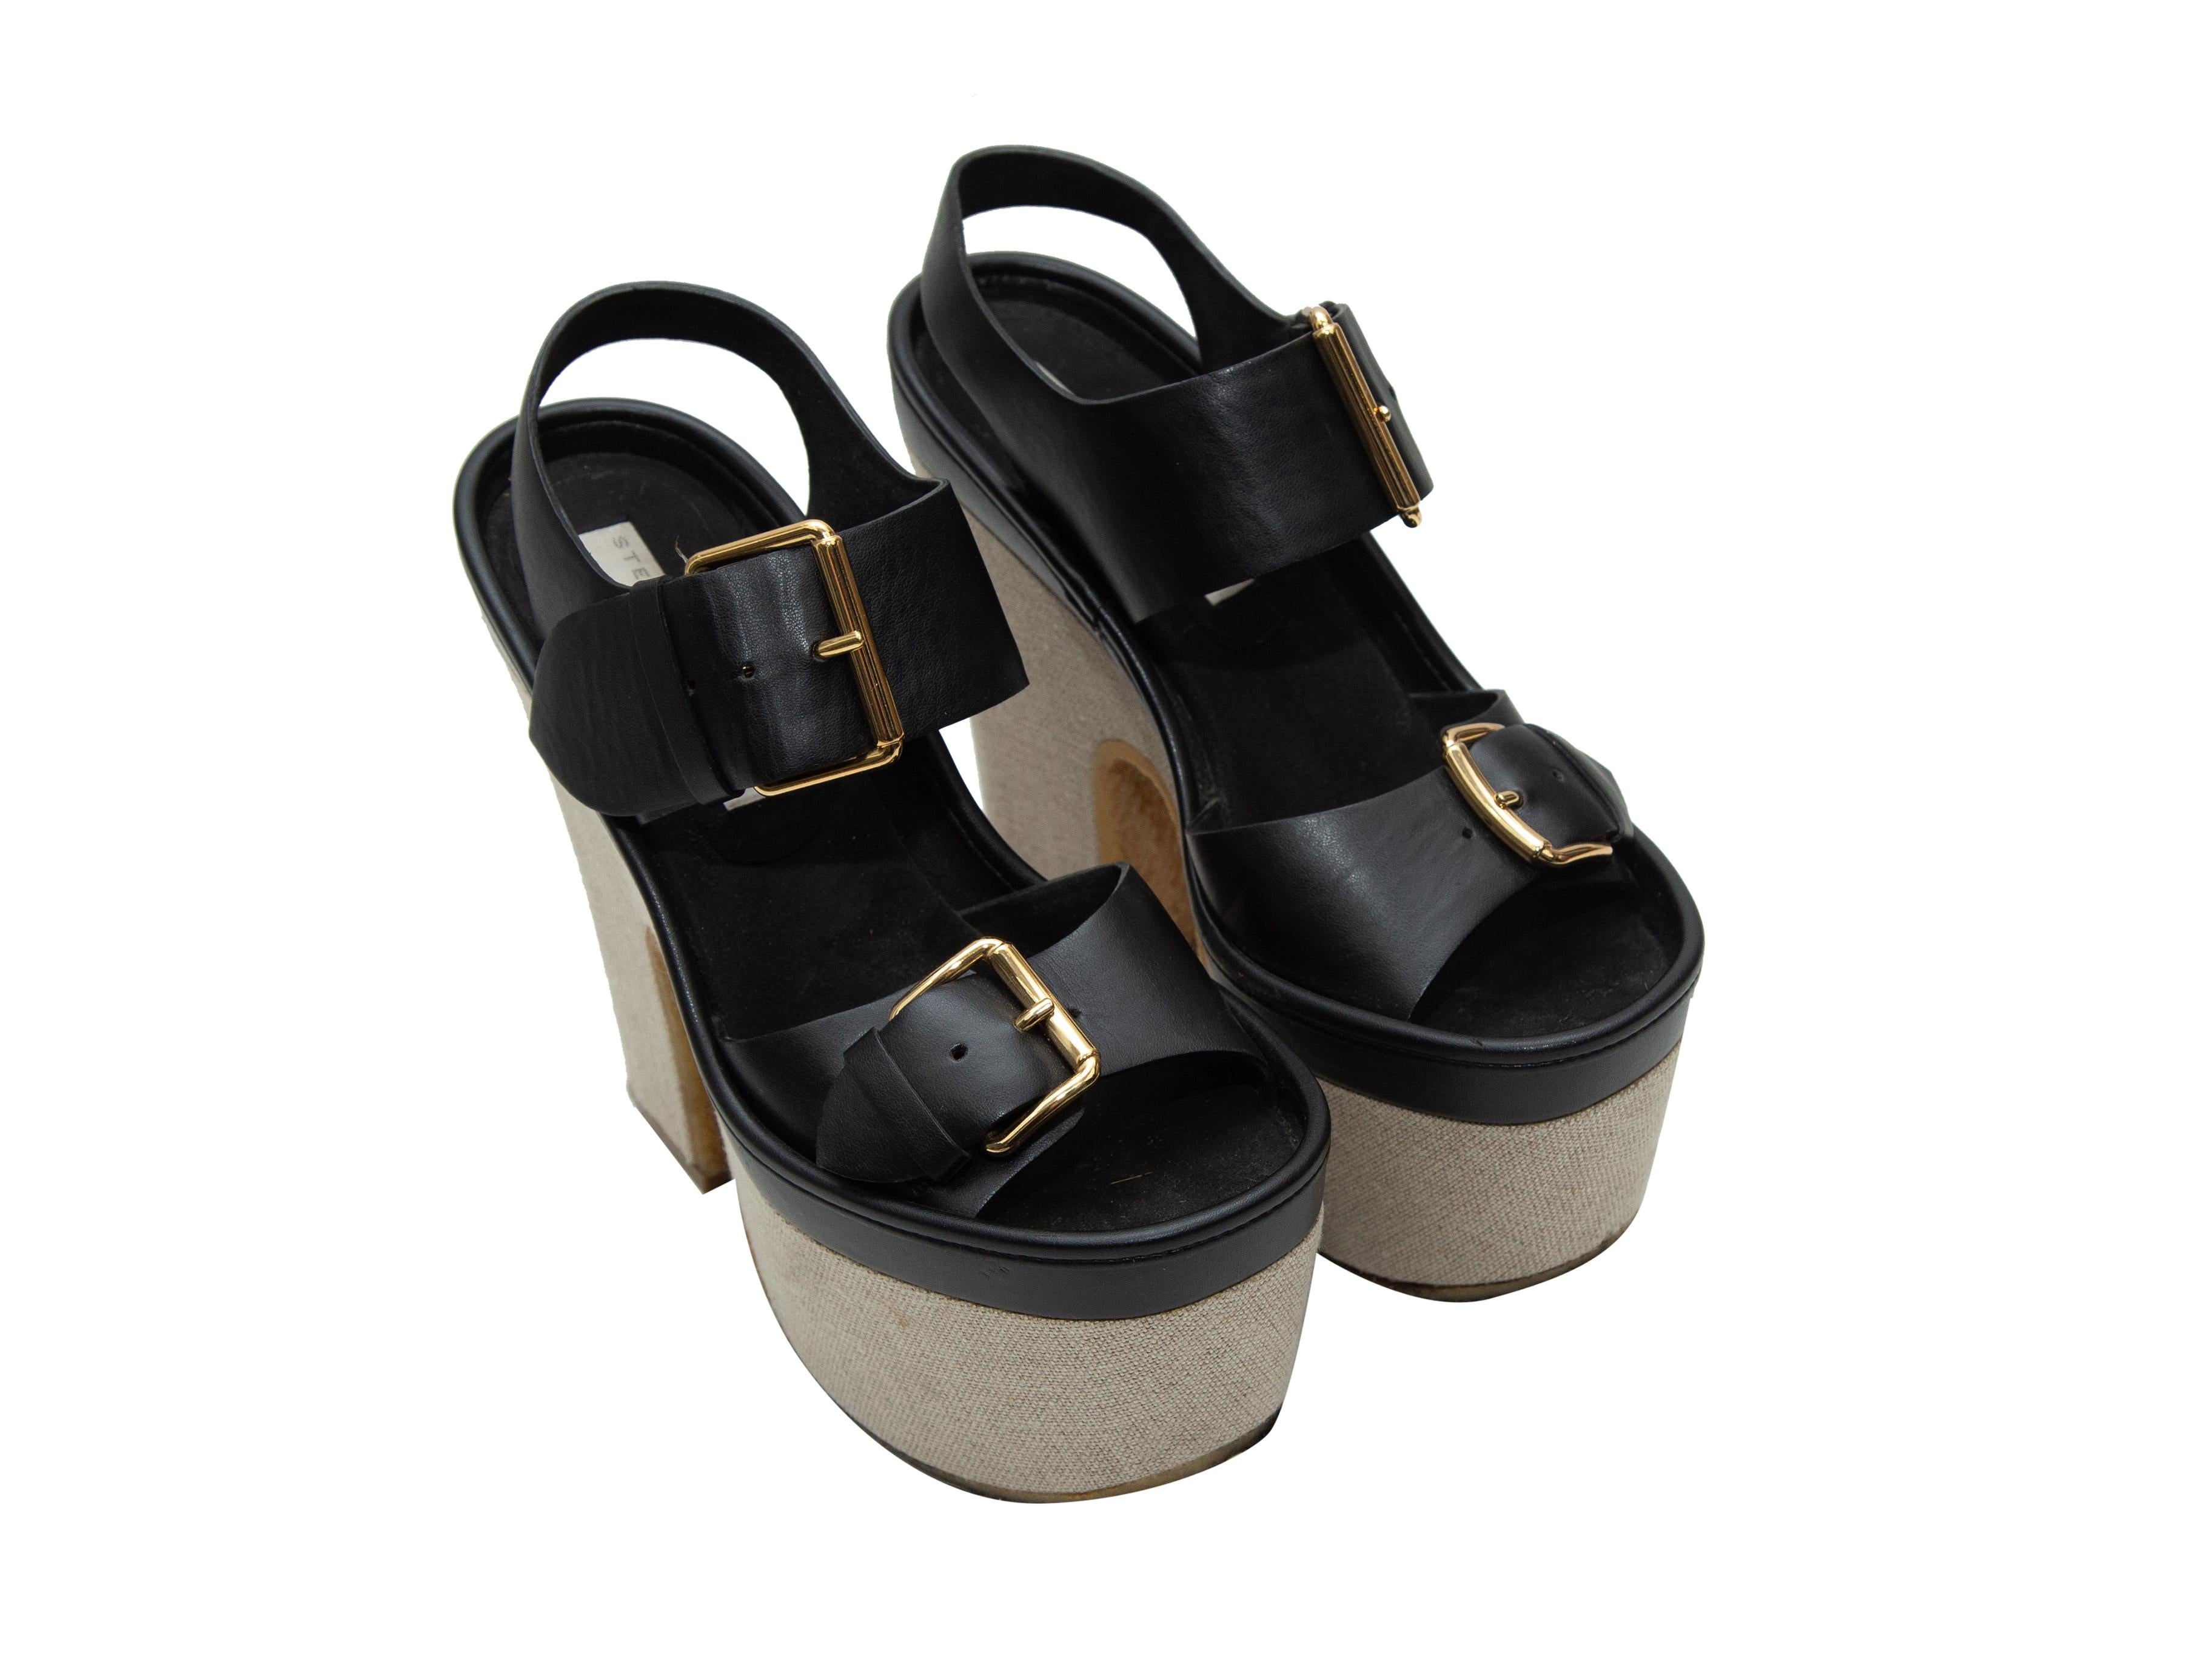 Product details: Black and beige platform sandals by Stella McCartney. Rubber soles. Gold-tone buckle closures at tops. 5.5